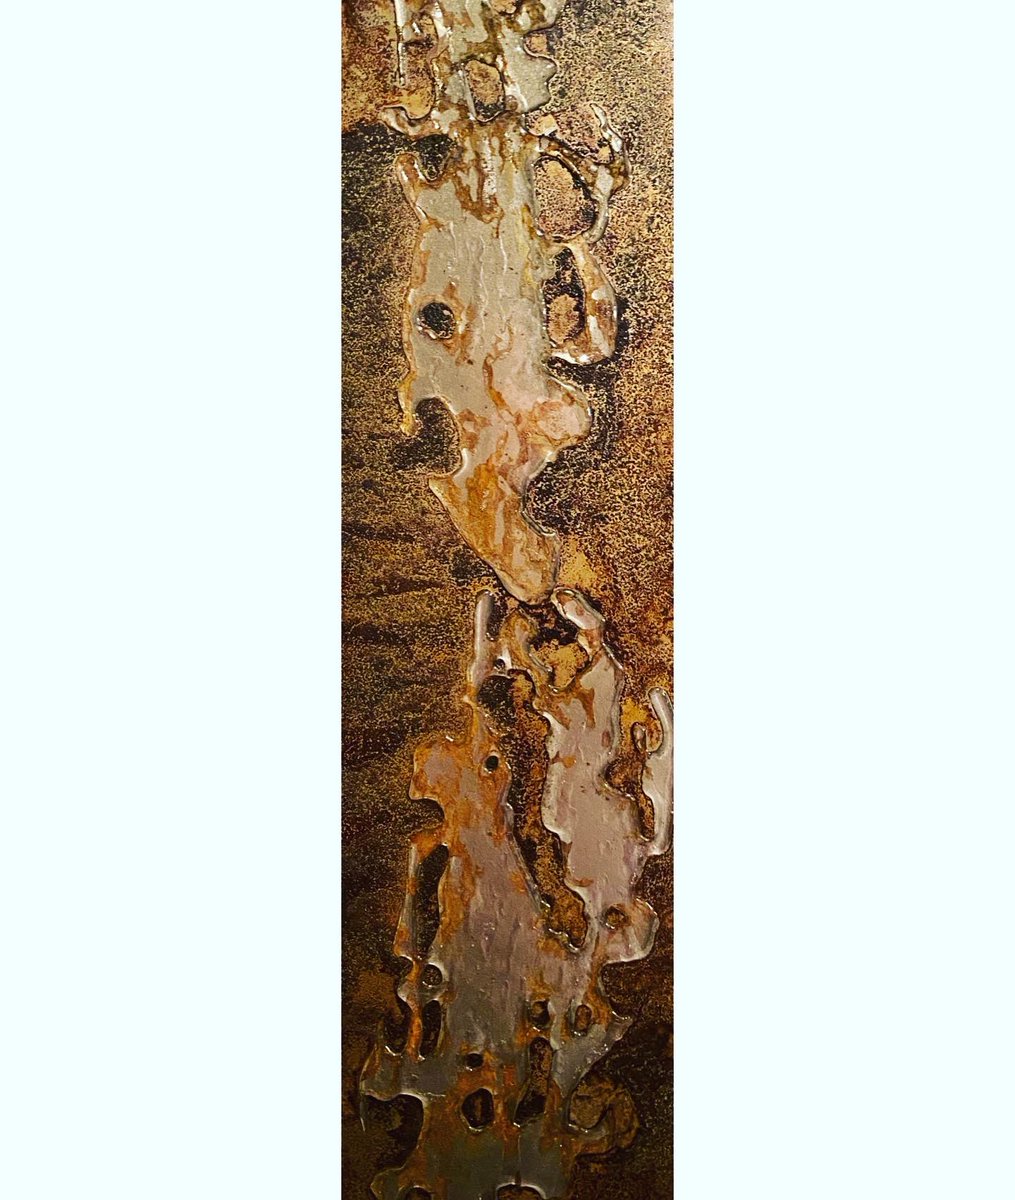 I placed some resin pieces on a metal plate and sprayed vinegar to rust it. Quite happy with the results.
6x24 in
#rustart #resinart #resin #Abstract #outsideart #rustneversleeps #canadianart #Ottawa #abstractart #artisfun #abstractartist #contemporaryart #artecontemporaneo #art